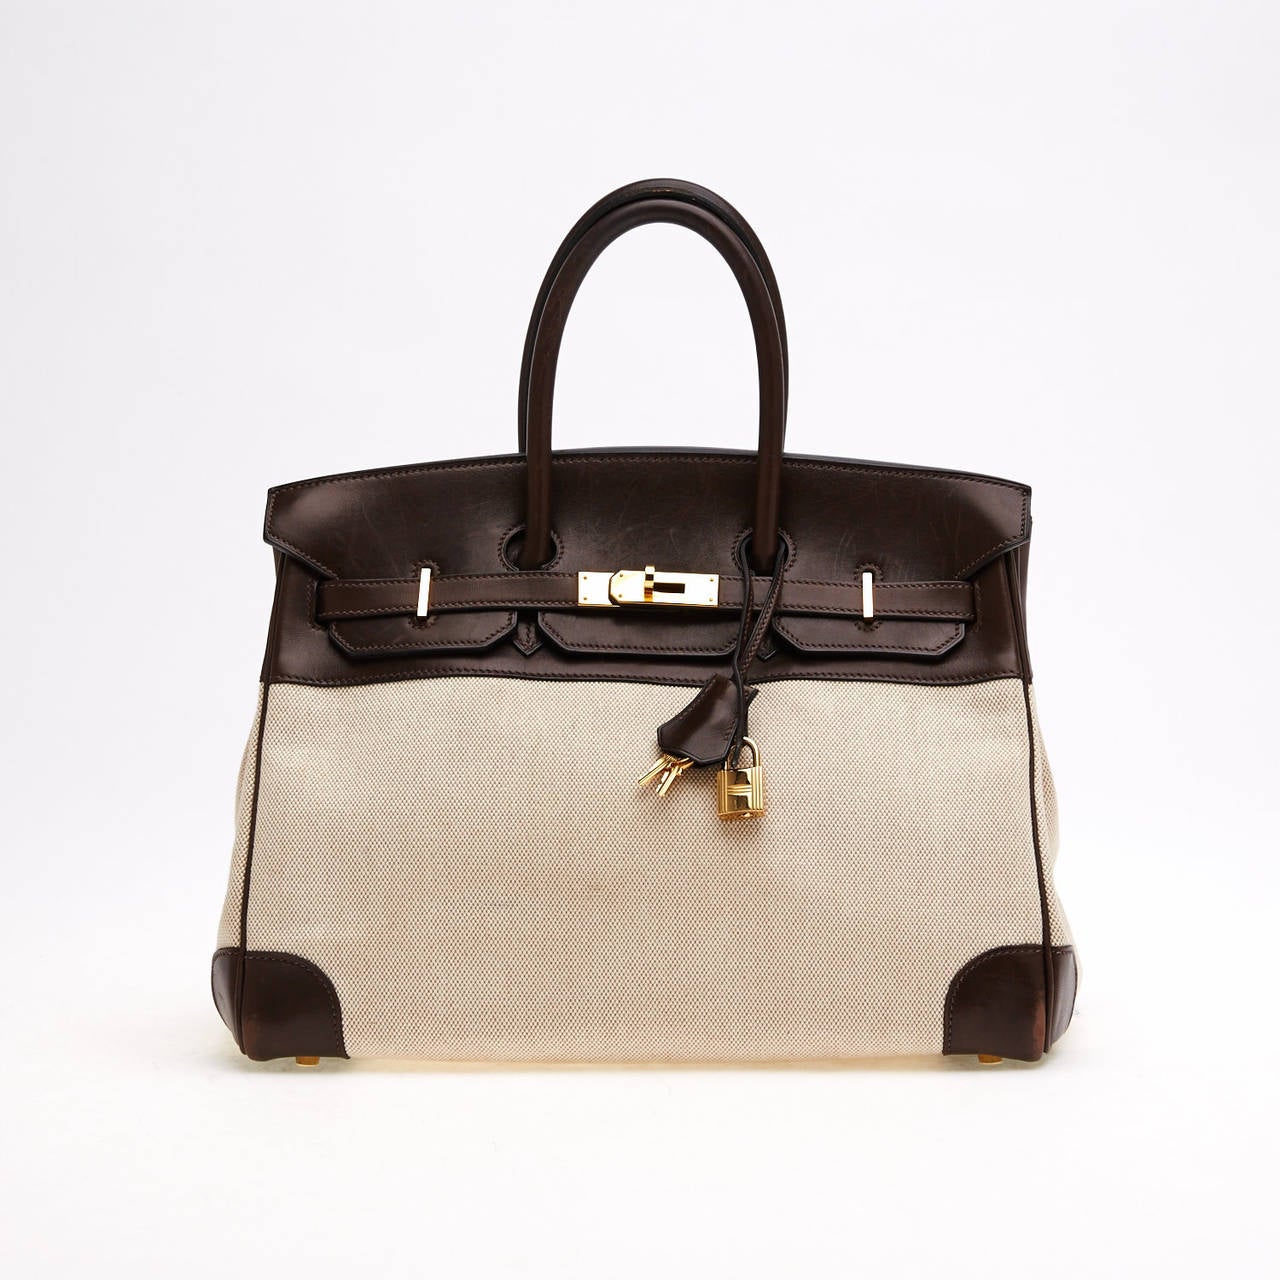 This authentic Hermes Birkin Canvas and Leather 35 is quite distinct yet understated. It is constructed with a chocolate brown leather trim and a canvas body. This contrasting design gives a new approach to the classic style Birkin. It is accented